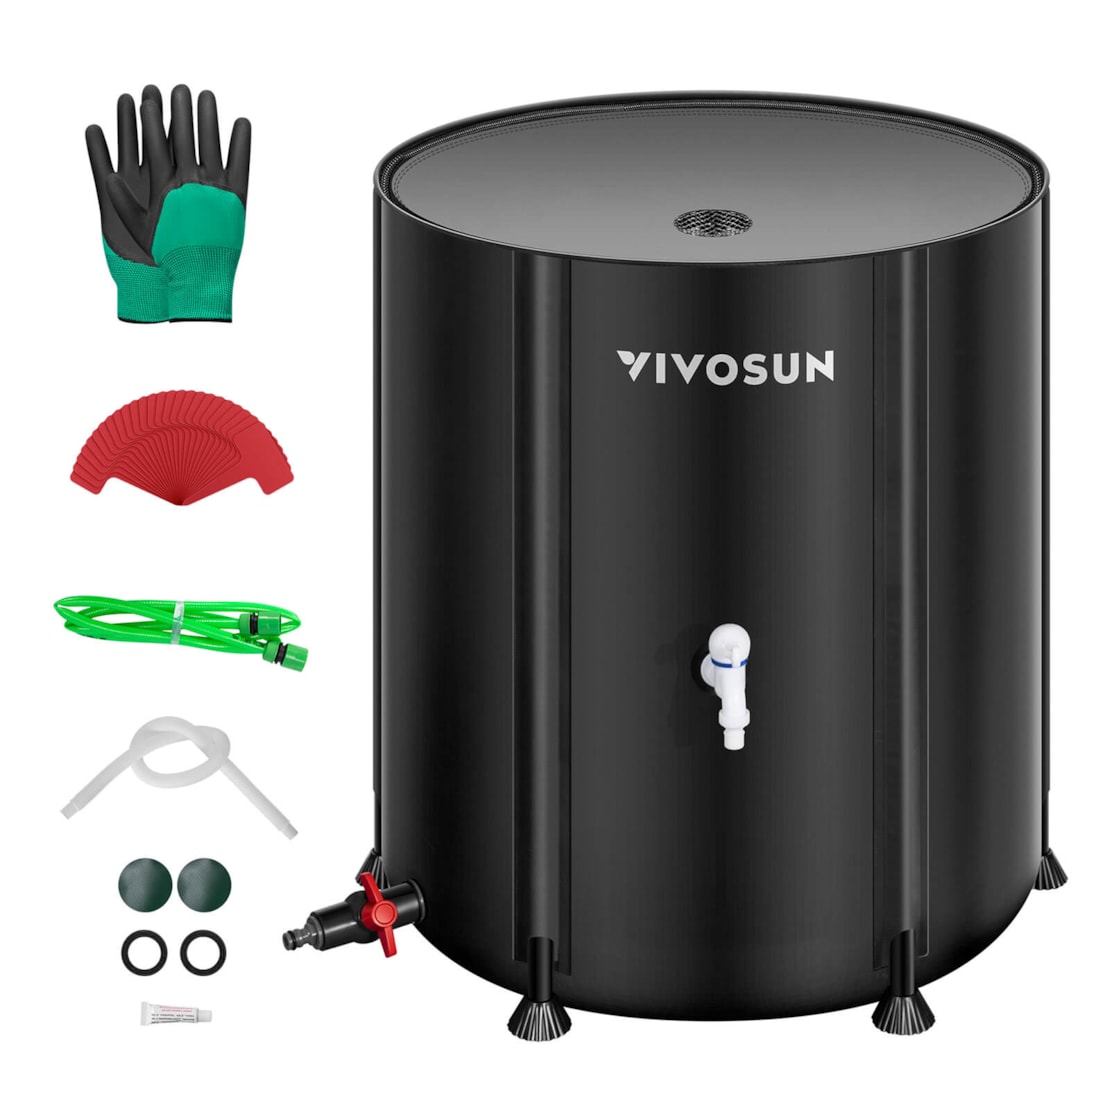 VIVOSUN Collapsible Rain Barrel, 100 Gallon Water Storage Tank with 1000D Oxford Cloth, Portable Rain Collection System Includes Two Spigots and Overflow Kit, Black